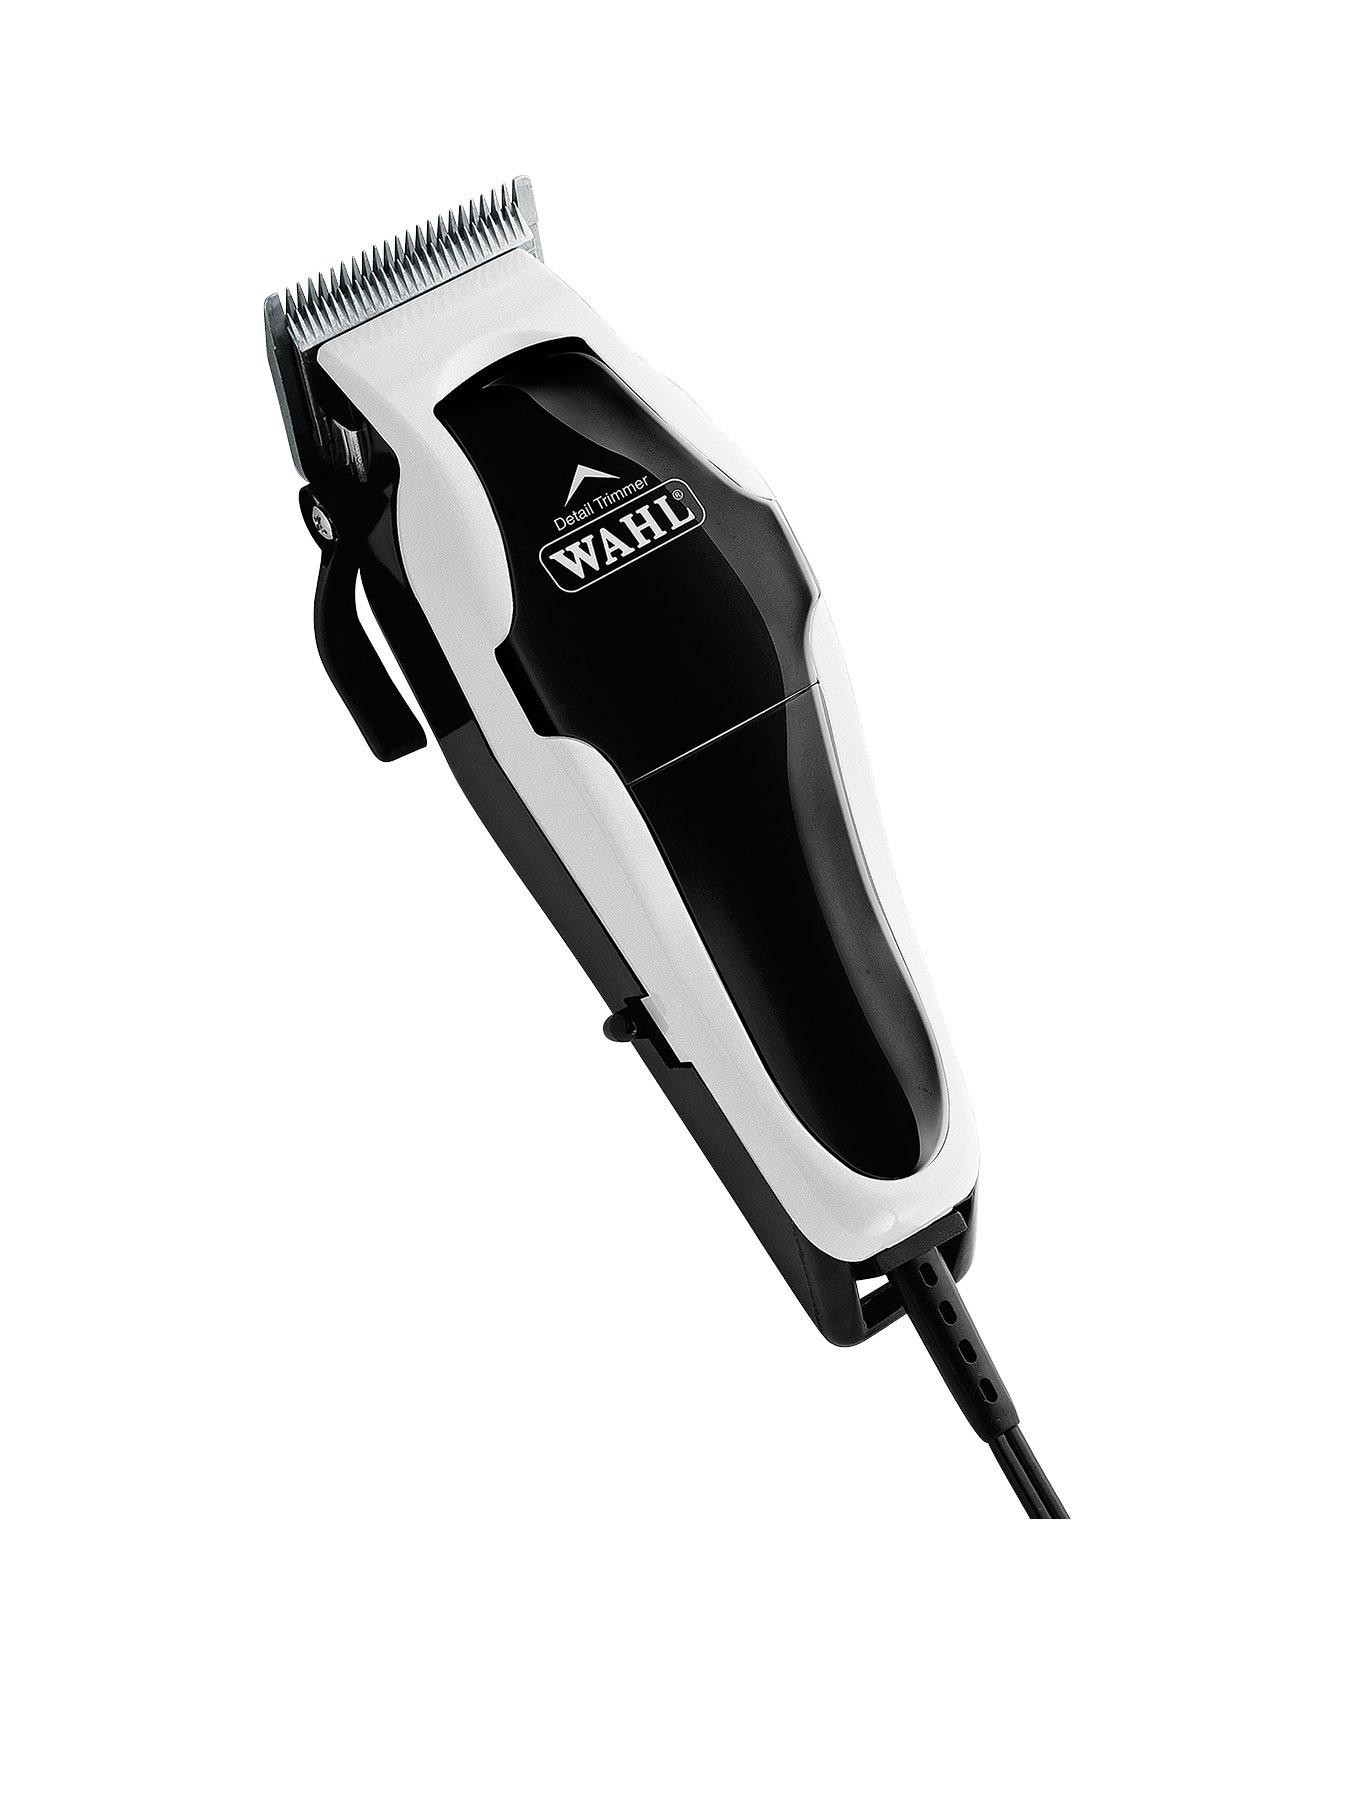 hair clippers littlewoods